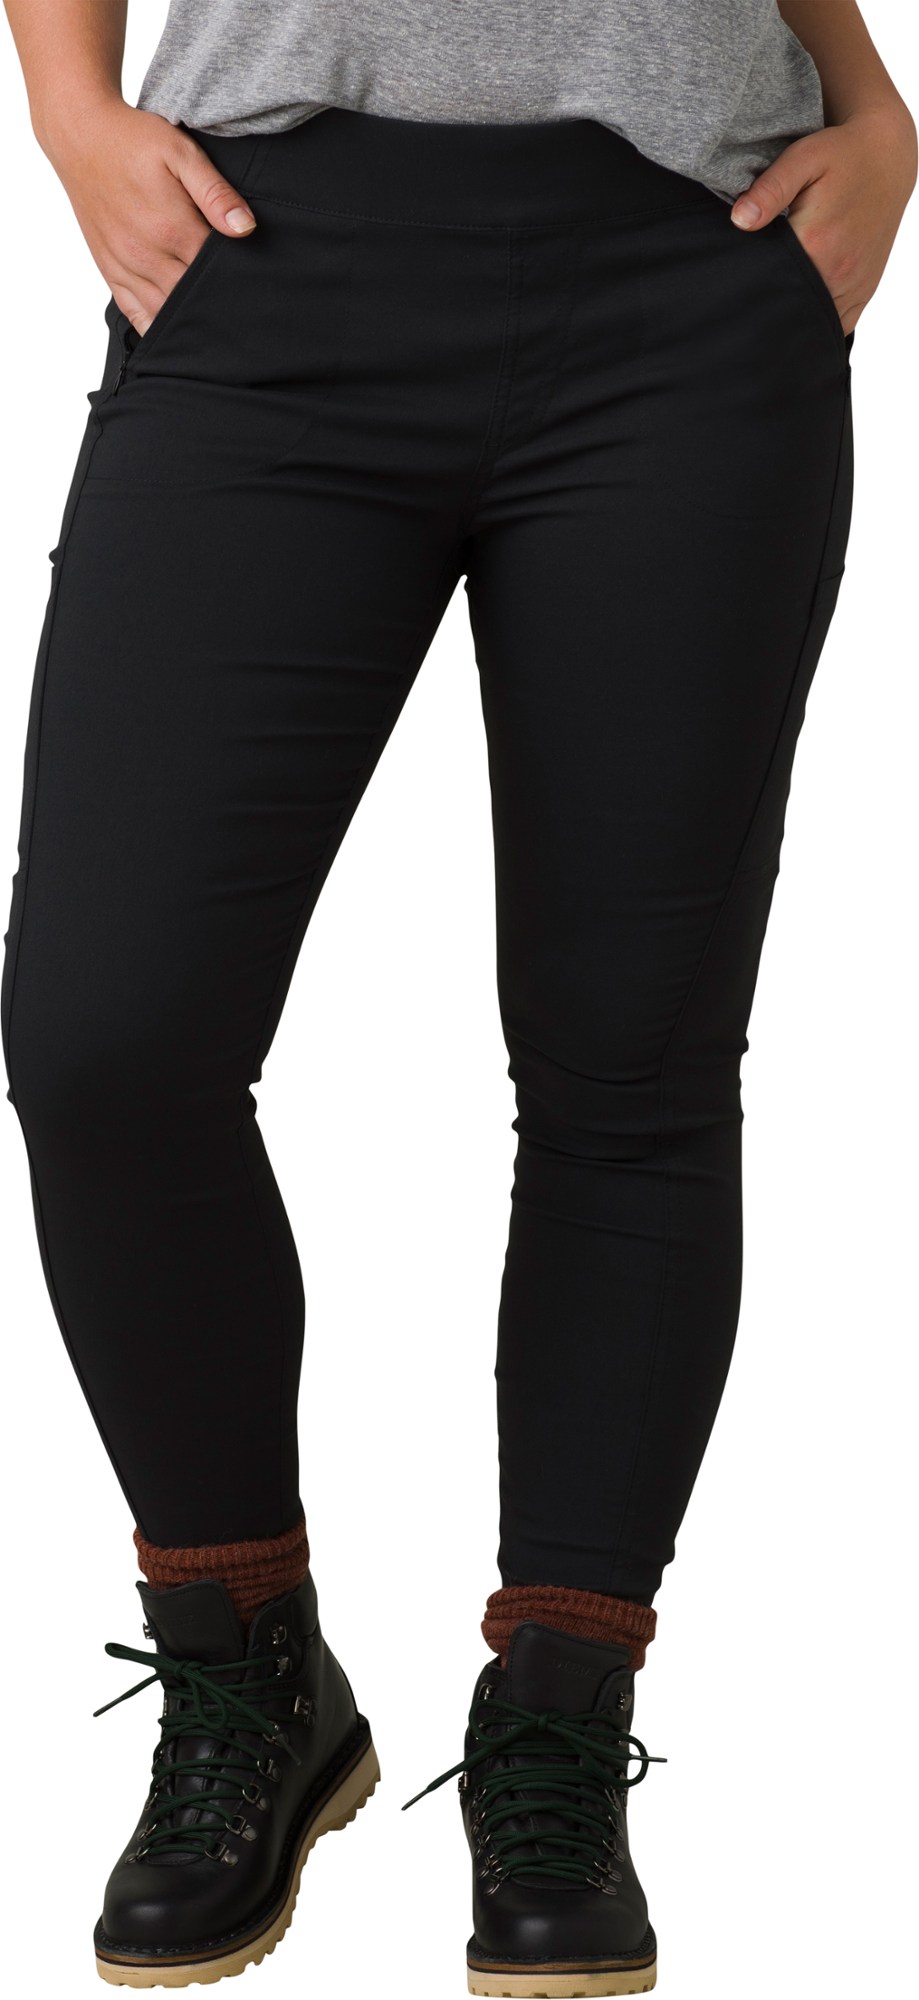 Prana Remy Leggings - Stylish and Comfortable Women's Casual Pants